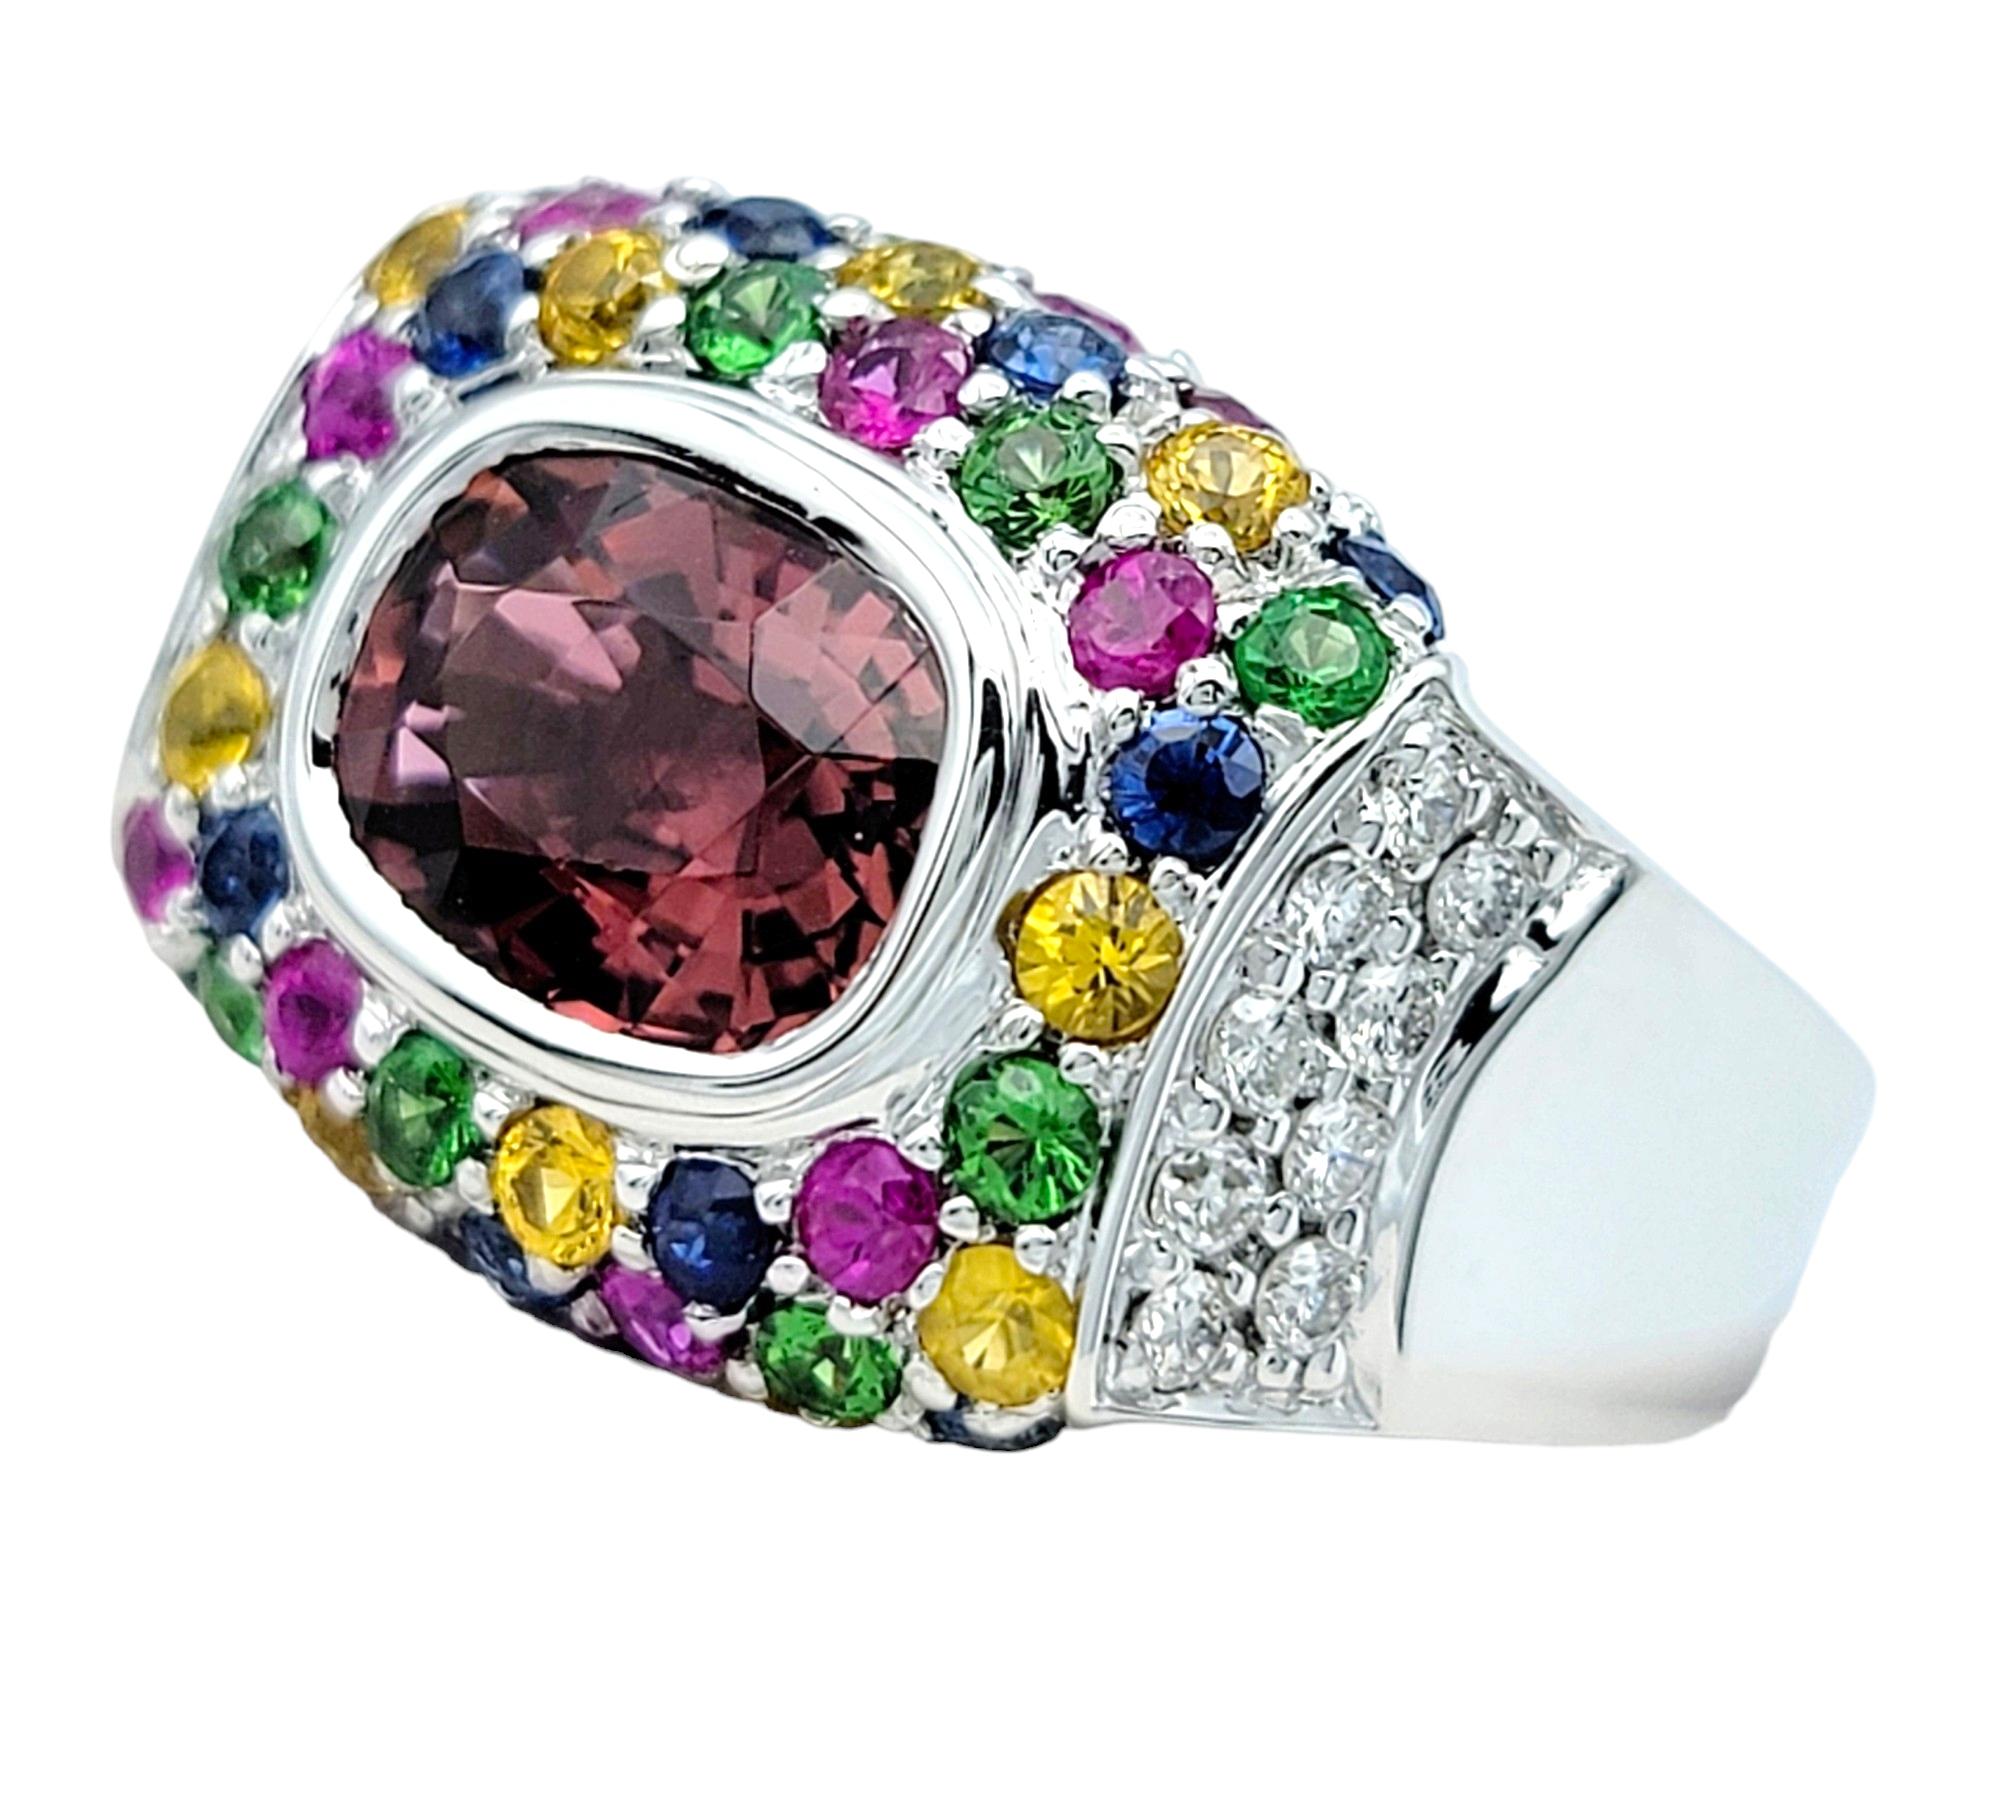 Ring Size: 7

This beautiful Sonia B. ring features a striking large cushion pink tourmaline as its centerpiece, encircled by an array of multicolored lab-grown sapphires, as well as natural round diamonds along the sides. Set in elegant 18 karat